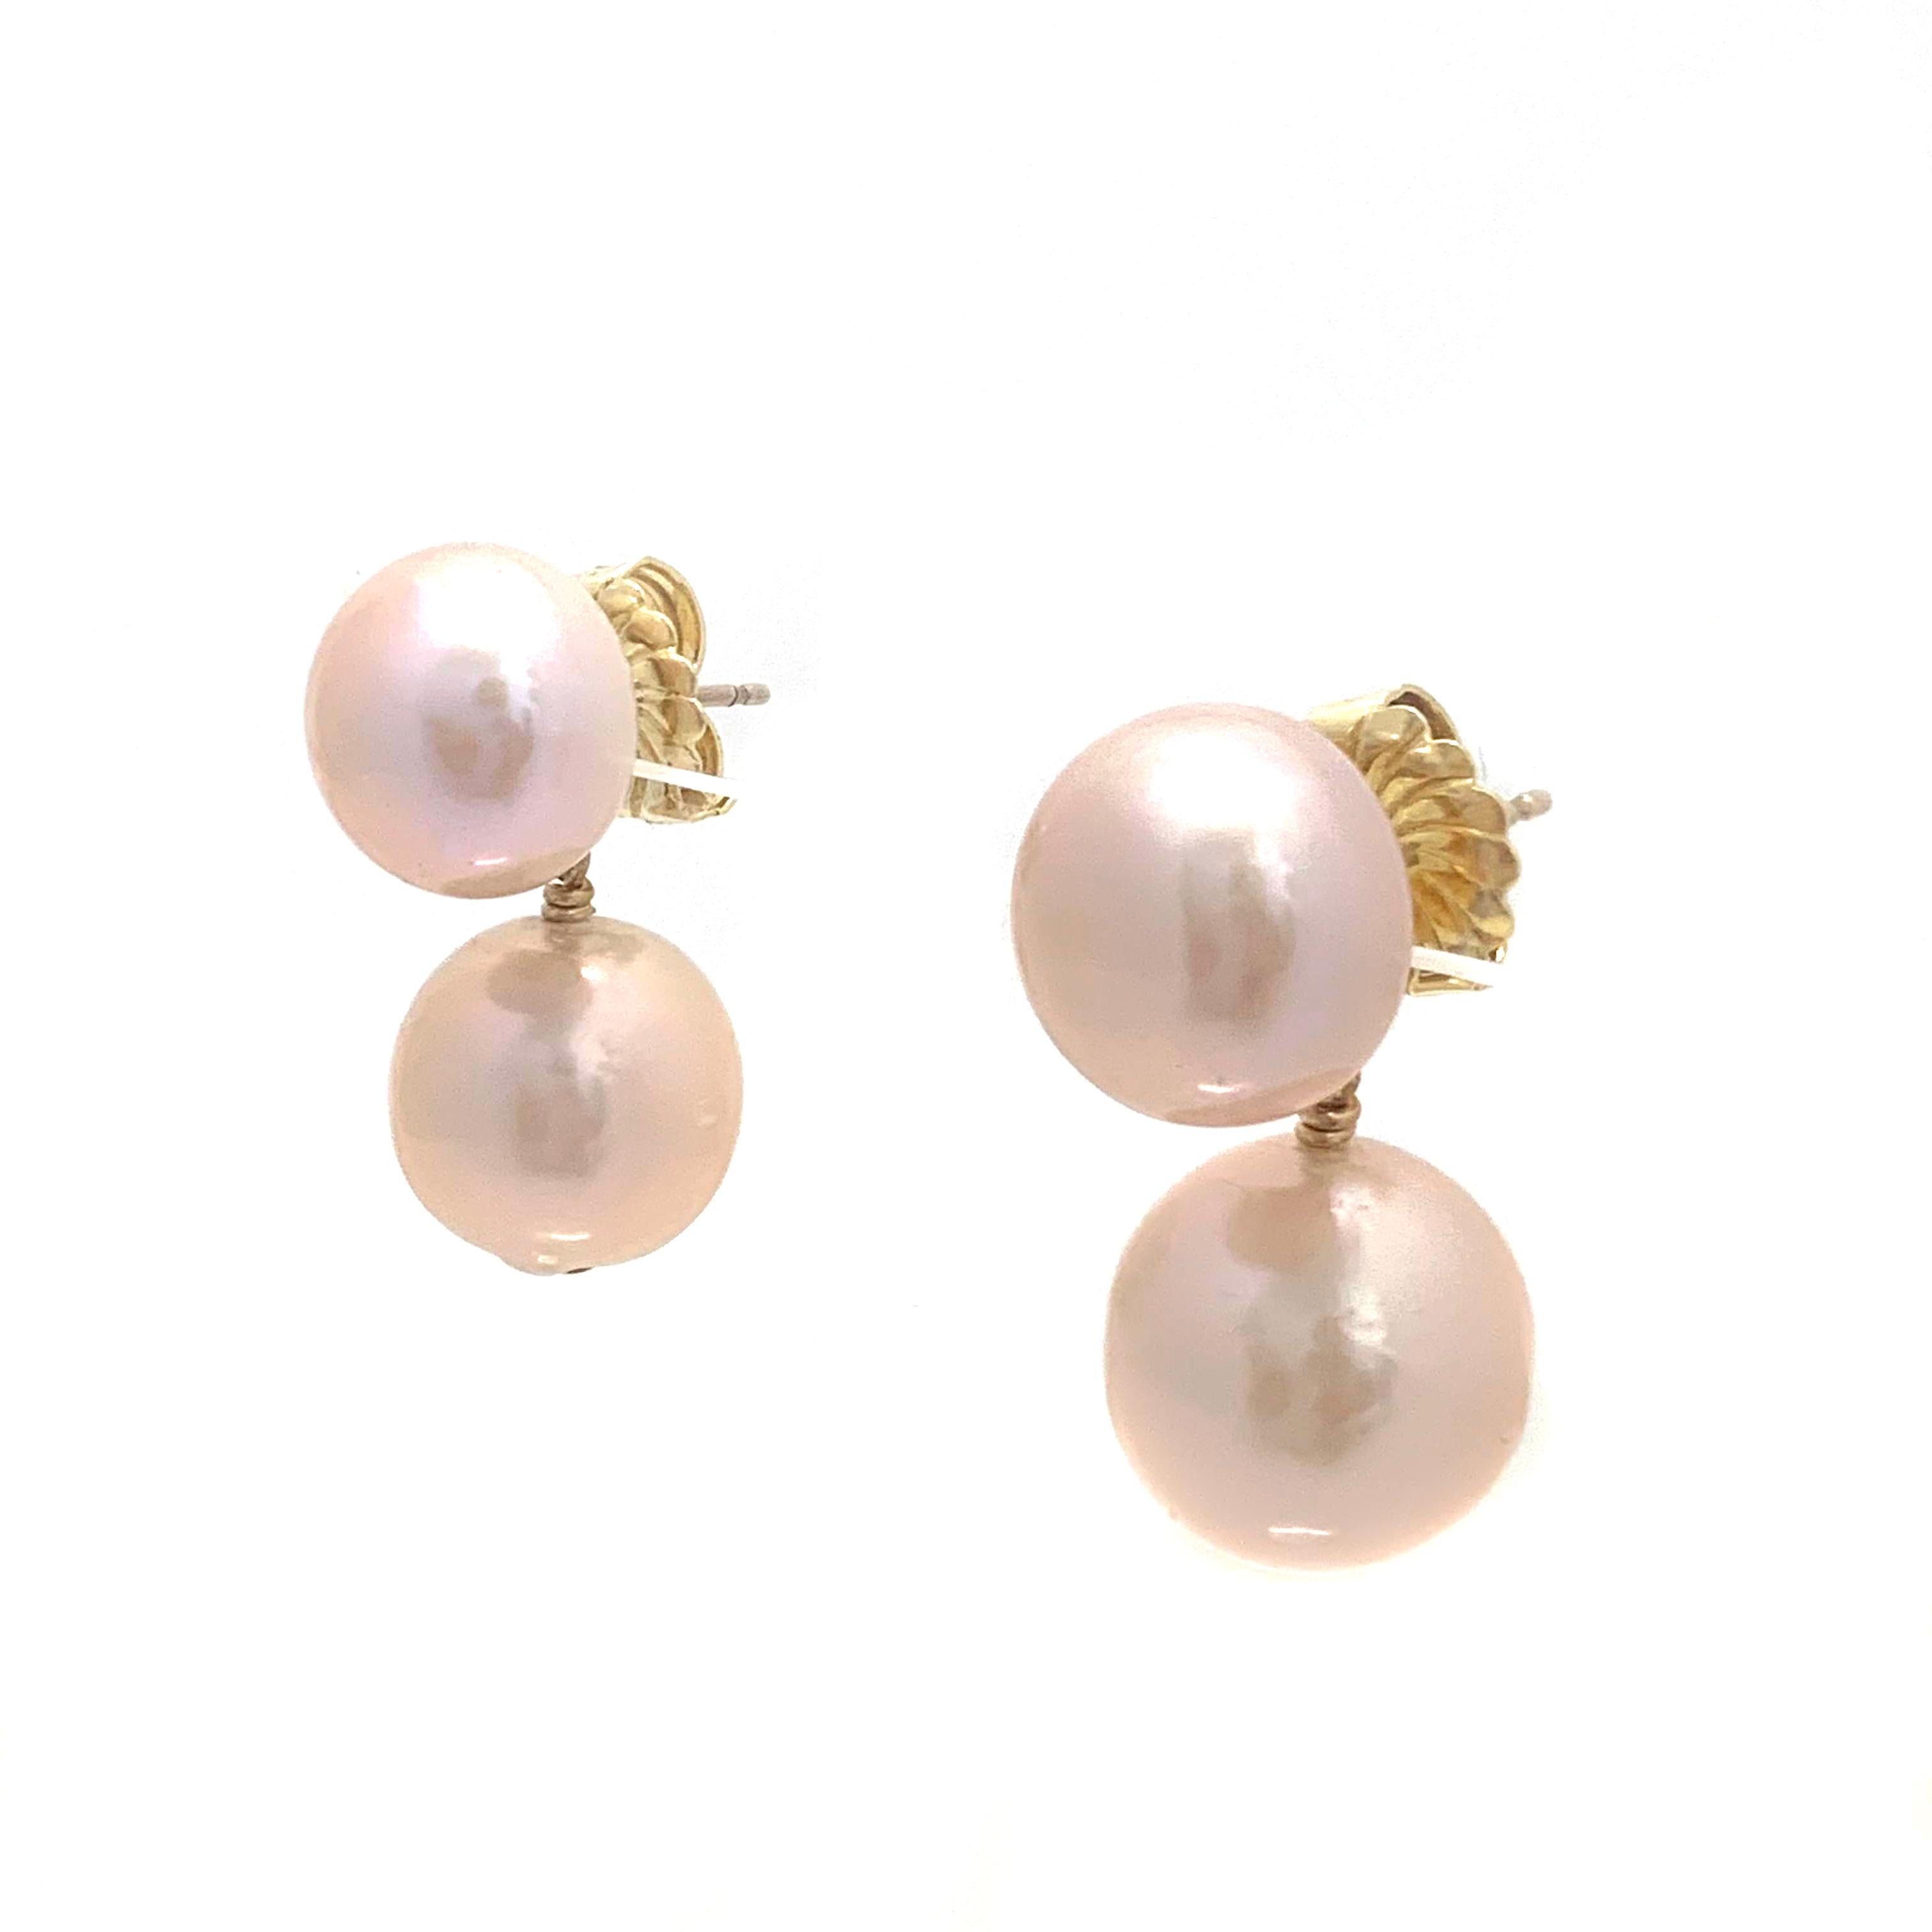 Contemporary Double 12-13mm Cultured Pearl Drop Earrings